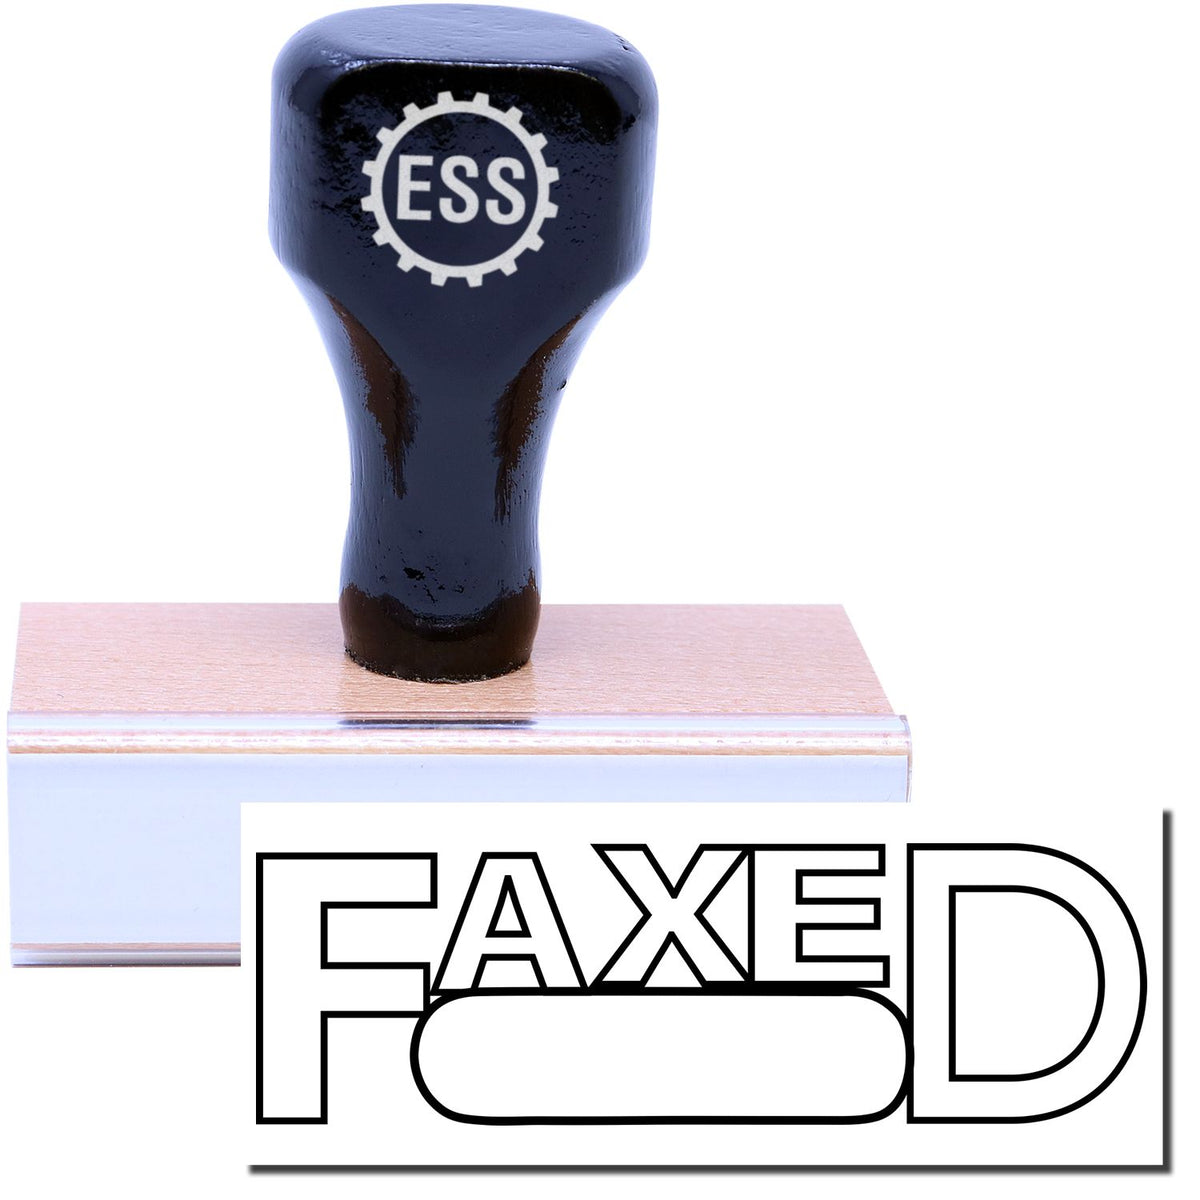 A stock office rubber stamp with a stamped image showing how the text &quot;FAXED&quot; in an outline font with a round date box is displayed after stamping.